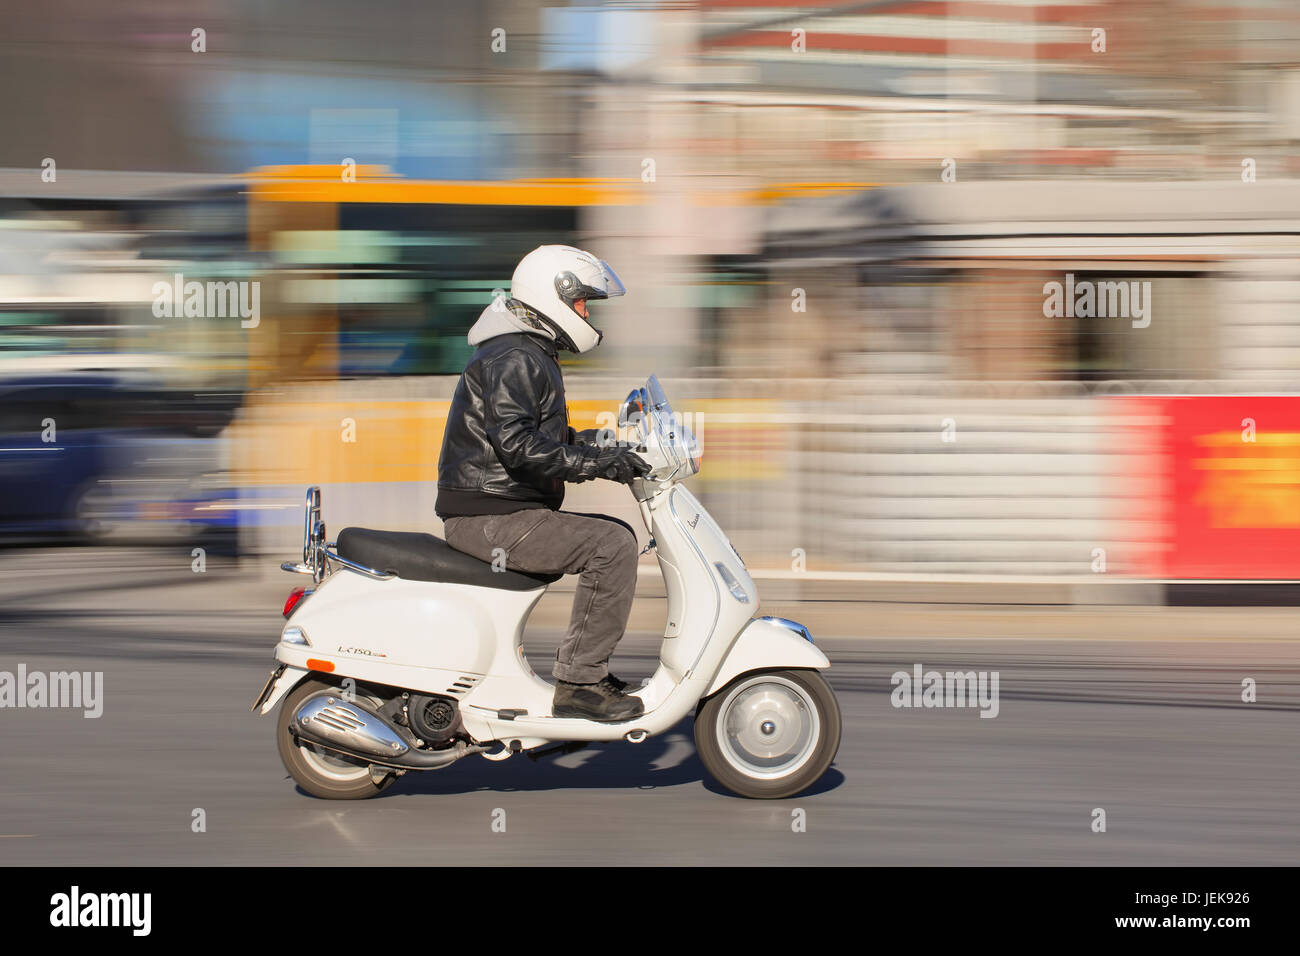 BEIJING-DEC. 5, 2015. Man on Vespa scooter LS 150. The LX scooters were launched in US in 2006 (60th anniversary Vespa), while S was added in 2008. Stock Photo